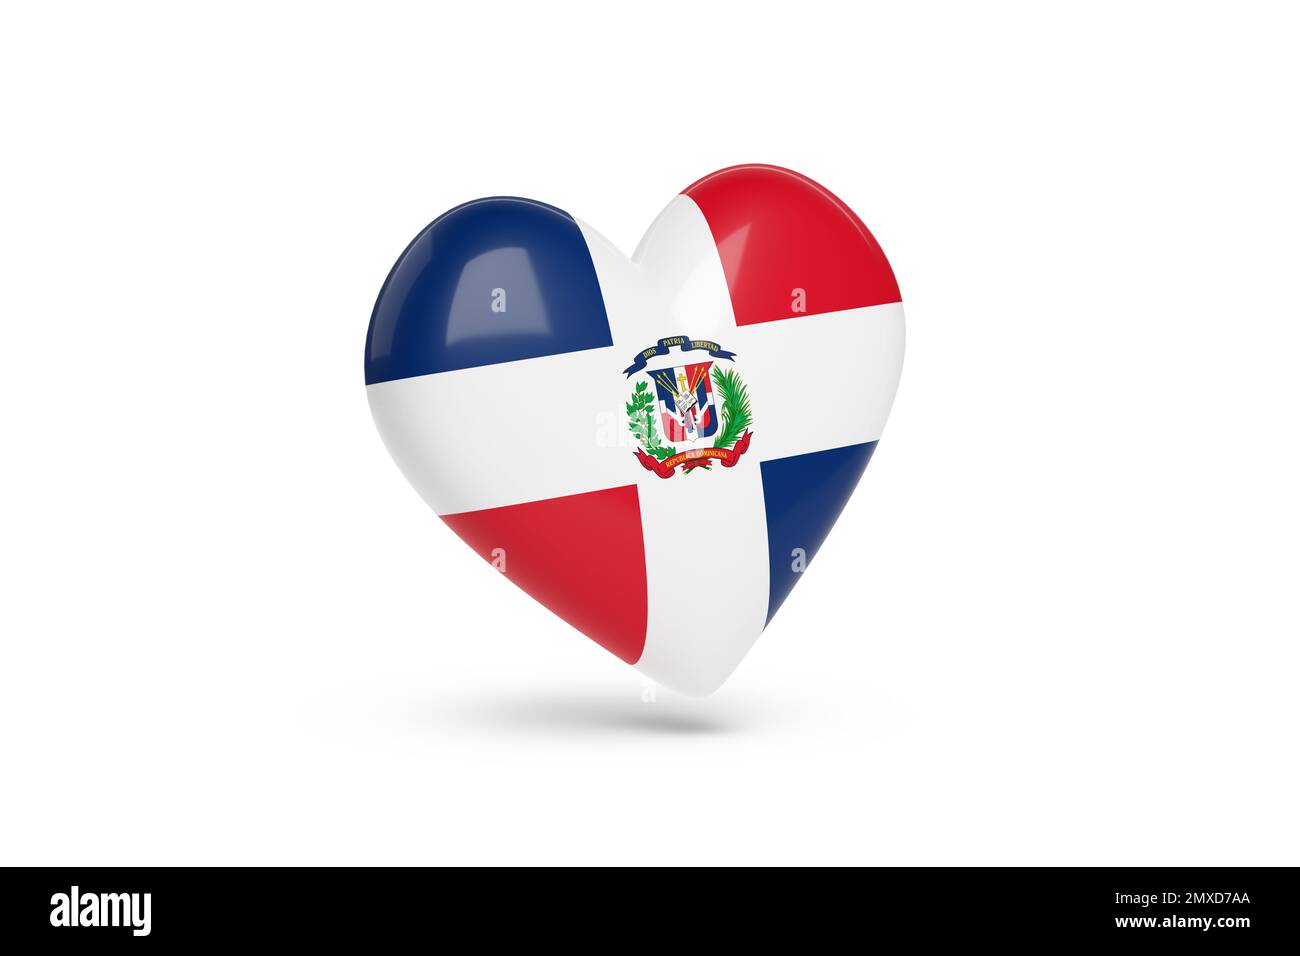 Heart with the colors of flag of Dominican Republic isolated on white background. 3d illustration. Stock Photo